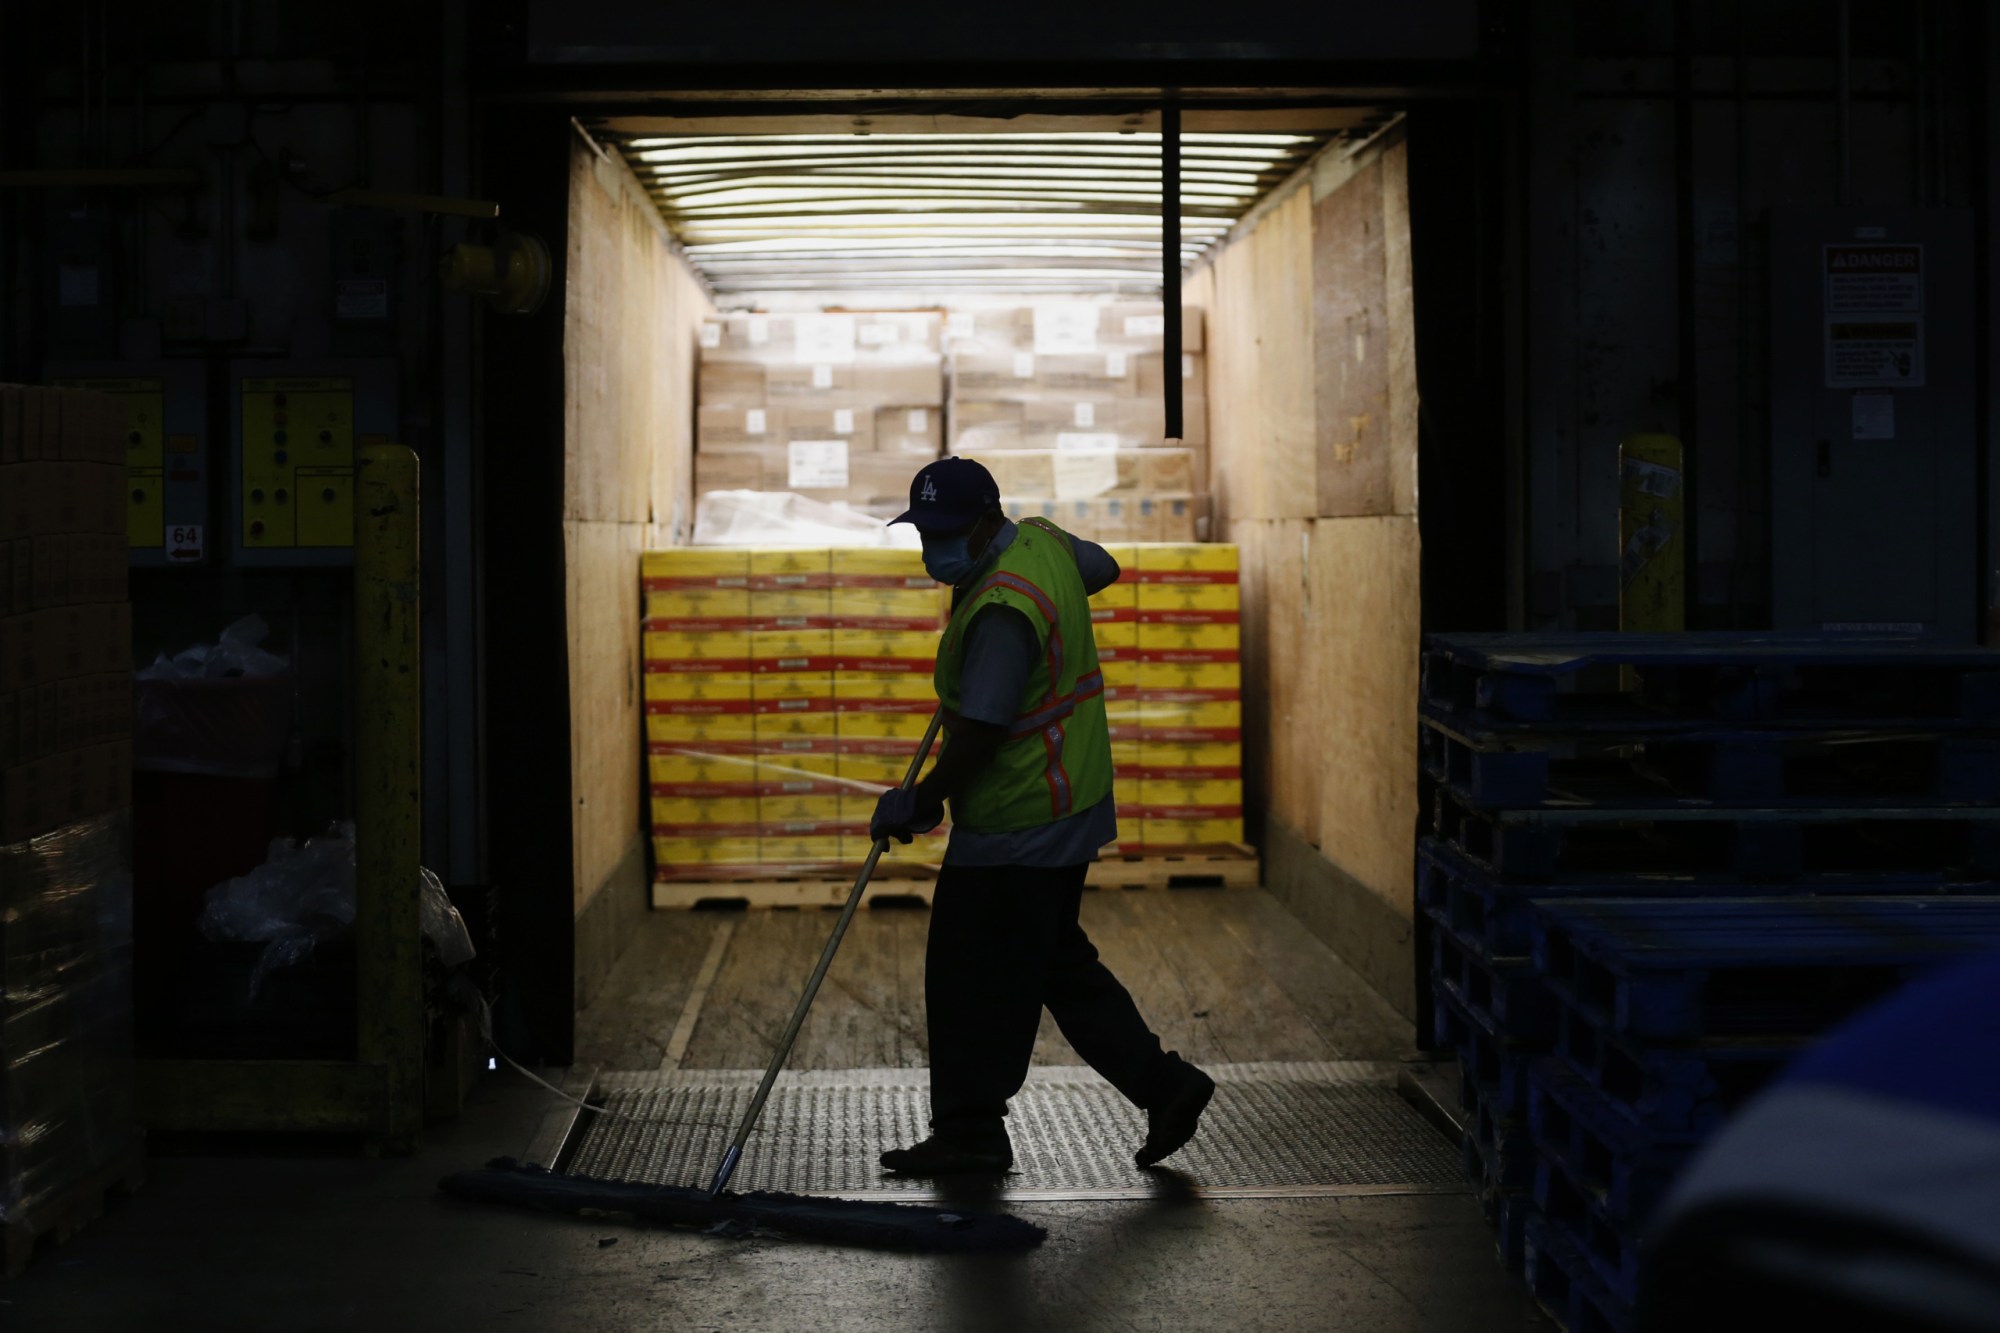 RIVERSIDE, CA -- APRIL 28: Associates fill orders for both Ralphs and Food 4 Less grocery stores at the Ralphs Distribution Center on Tuesday, April 28, 2020, in Riverside, CA. The 80 acre, 1.2 million square feet, full service distribution center employing 1100 workers took on more product after automated warehouses couldn't keep up with the spike in demand after restaurants were shuttered. (Gary Coronado / Los Angeles Times via Getty Images)